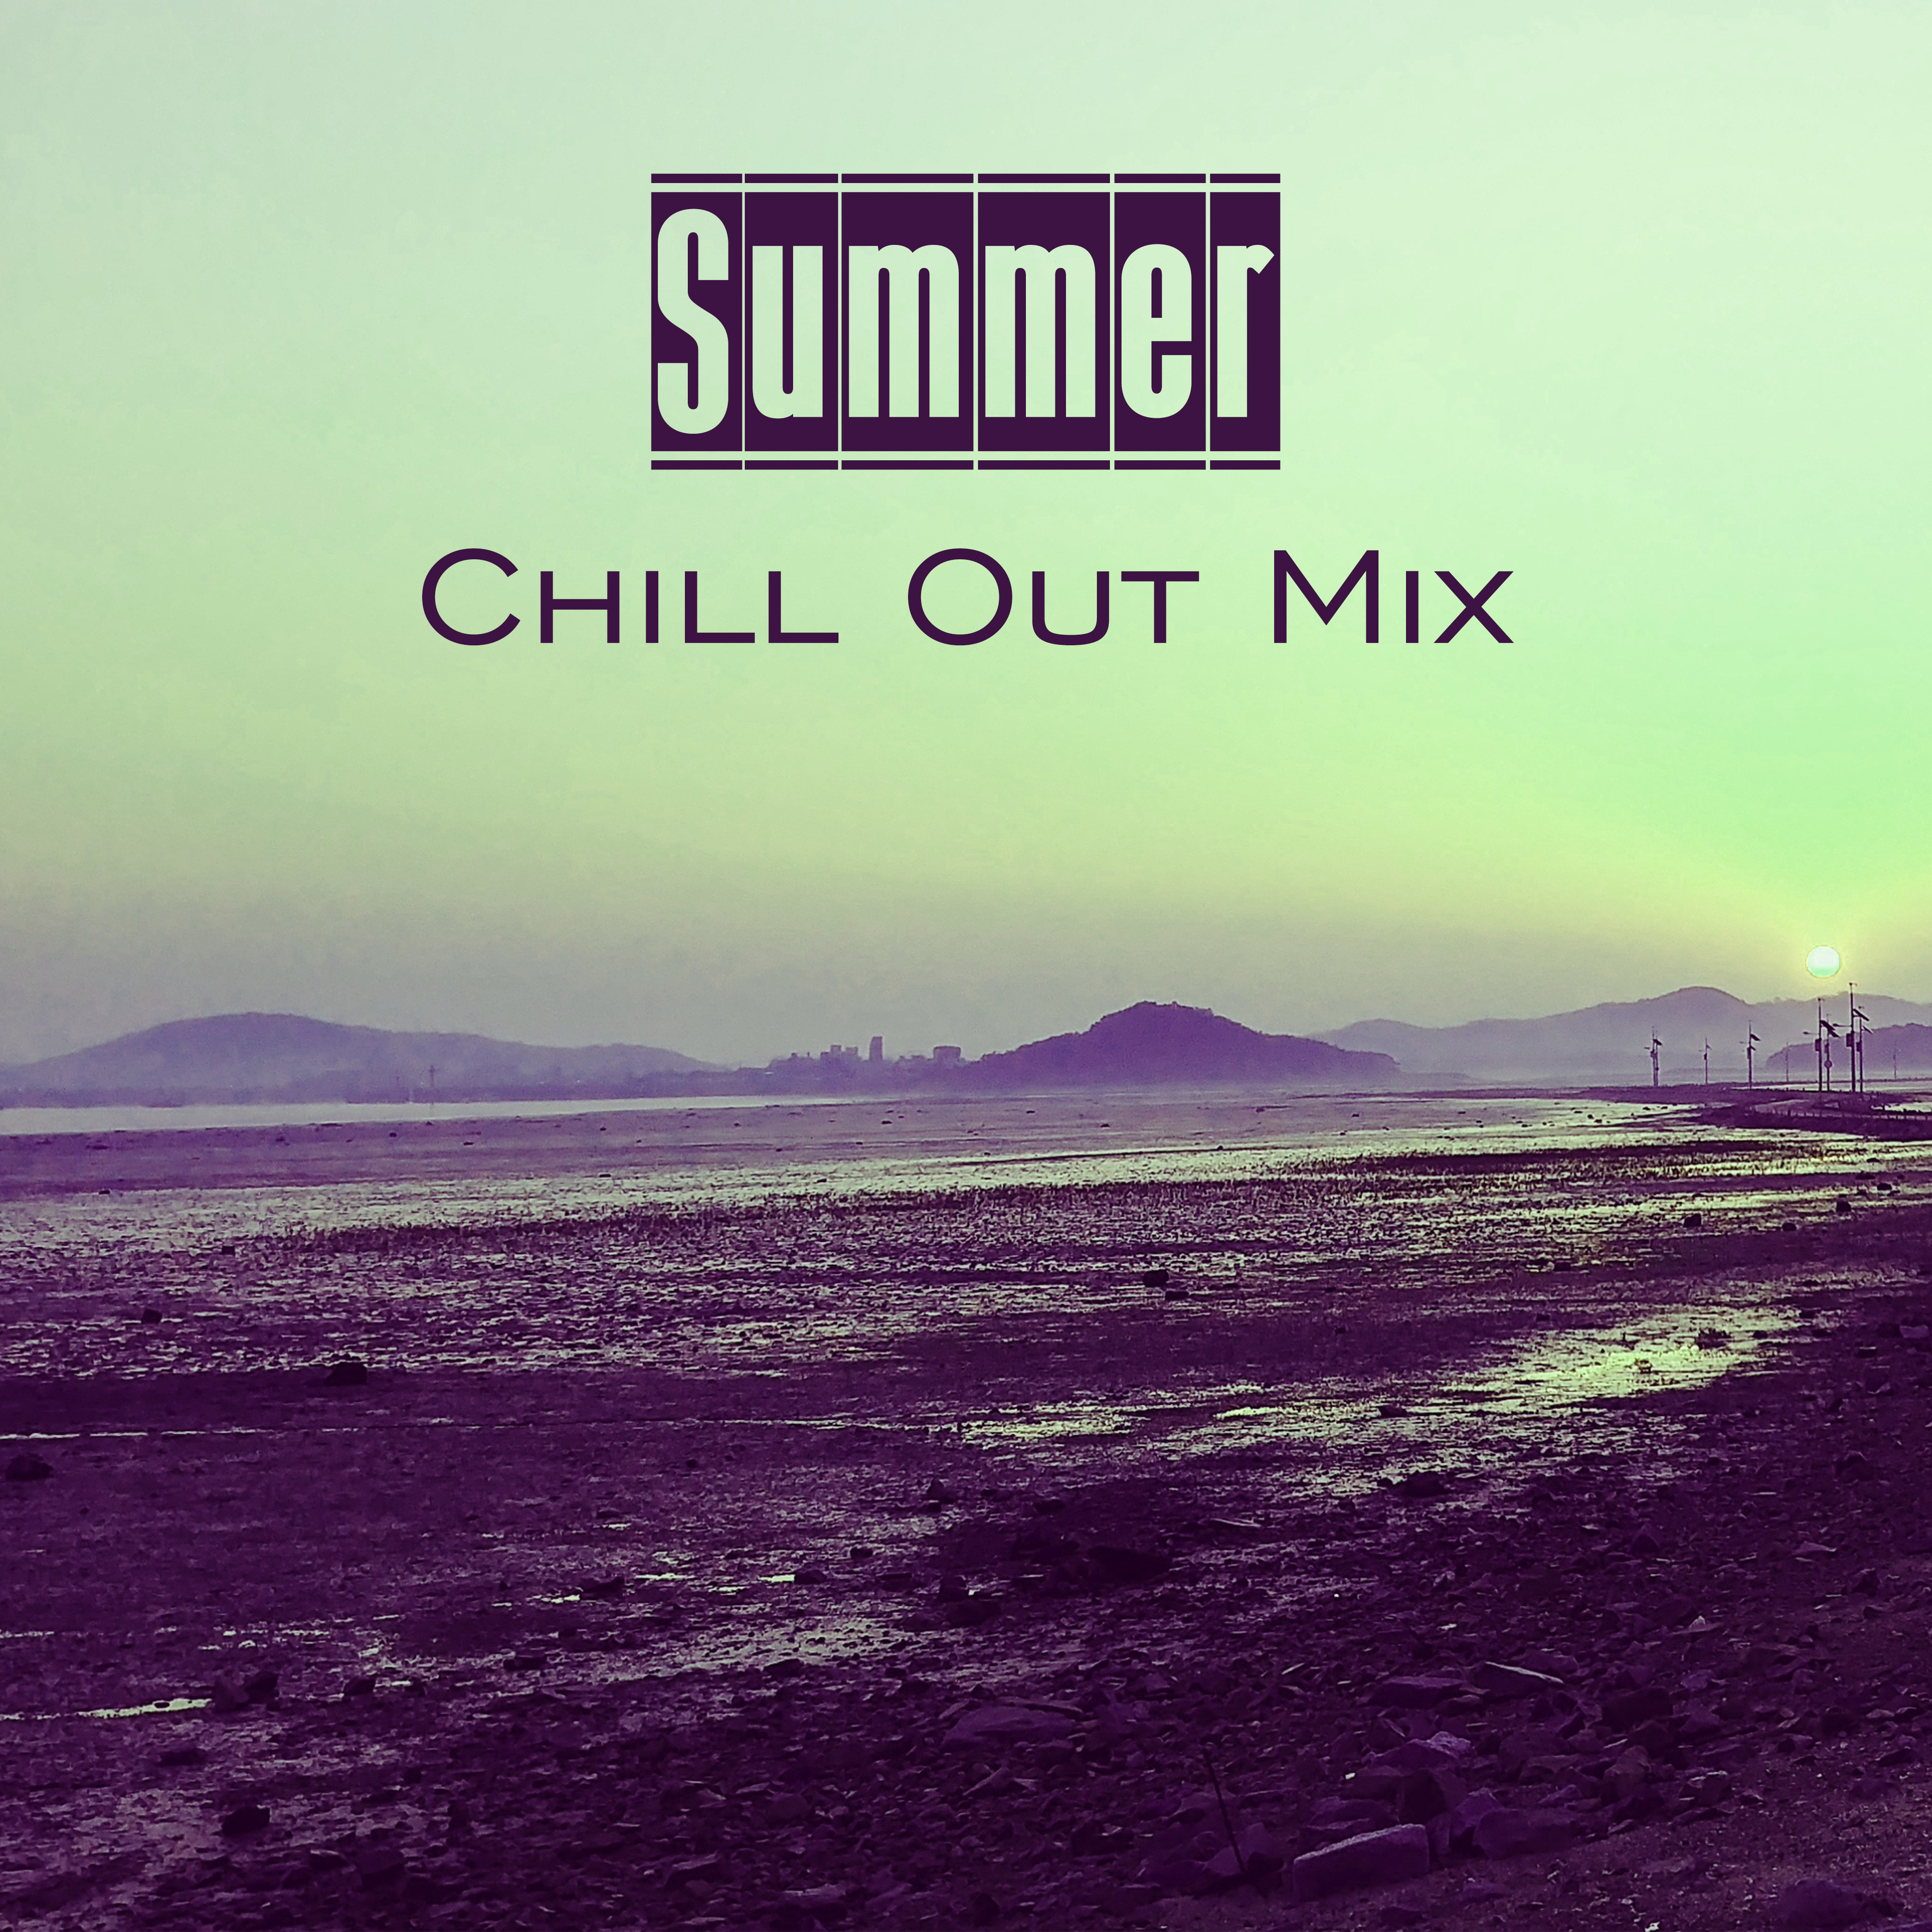 Summer Chill Out Mix – Relaxing Chill Out Songs, Sounds to Rest, Summer Vibes 2017, Beach Lounge